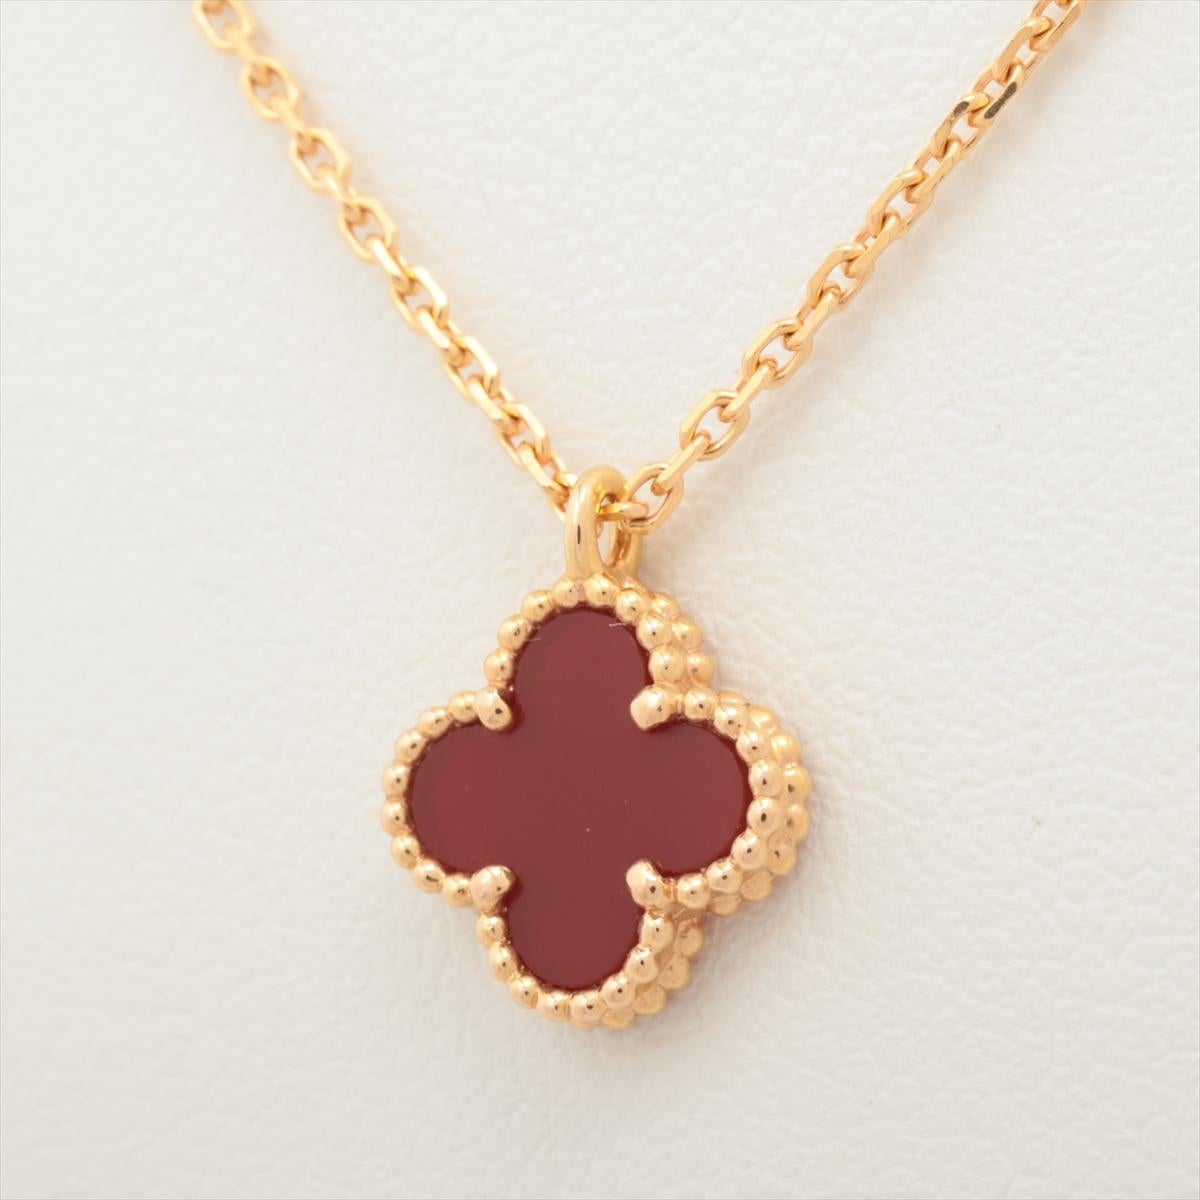 The Van Cleef & Arpels Sweet Alhambra Carnelian Necklace in Gold is a stunning piece of jewelry that exudes elegance and sophistication. Crafted by the renowned luxury brand Van Cleef & Arpels, the necklace features a delicate pendant in the shape